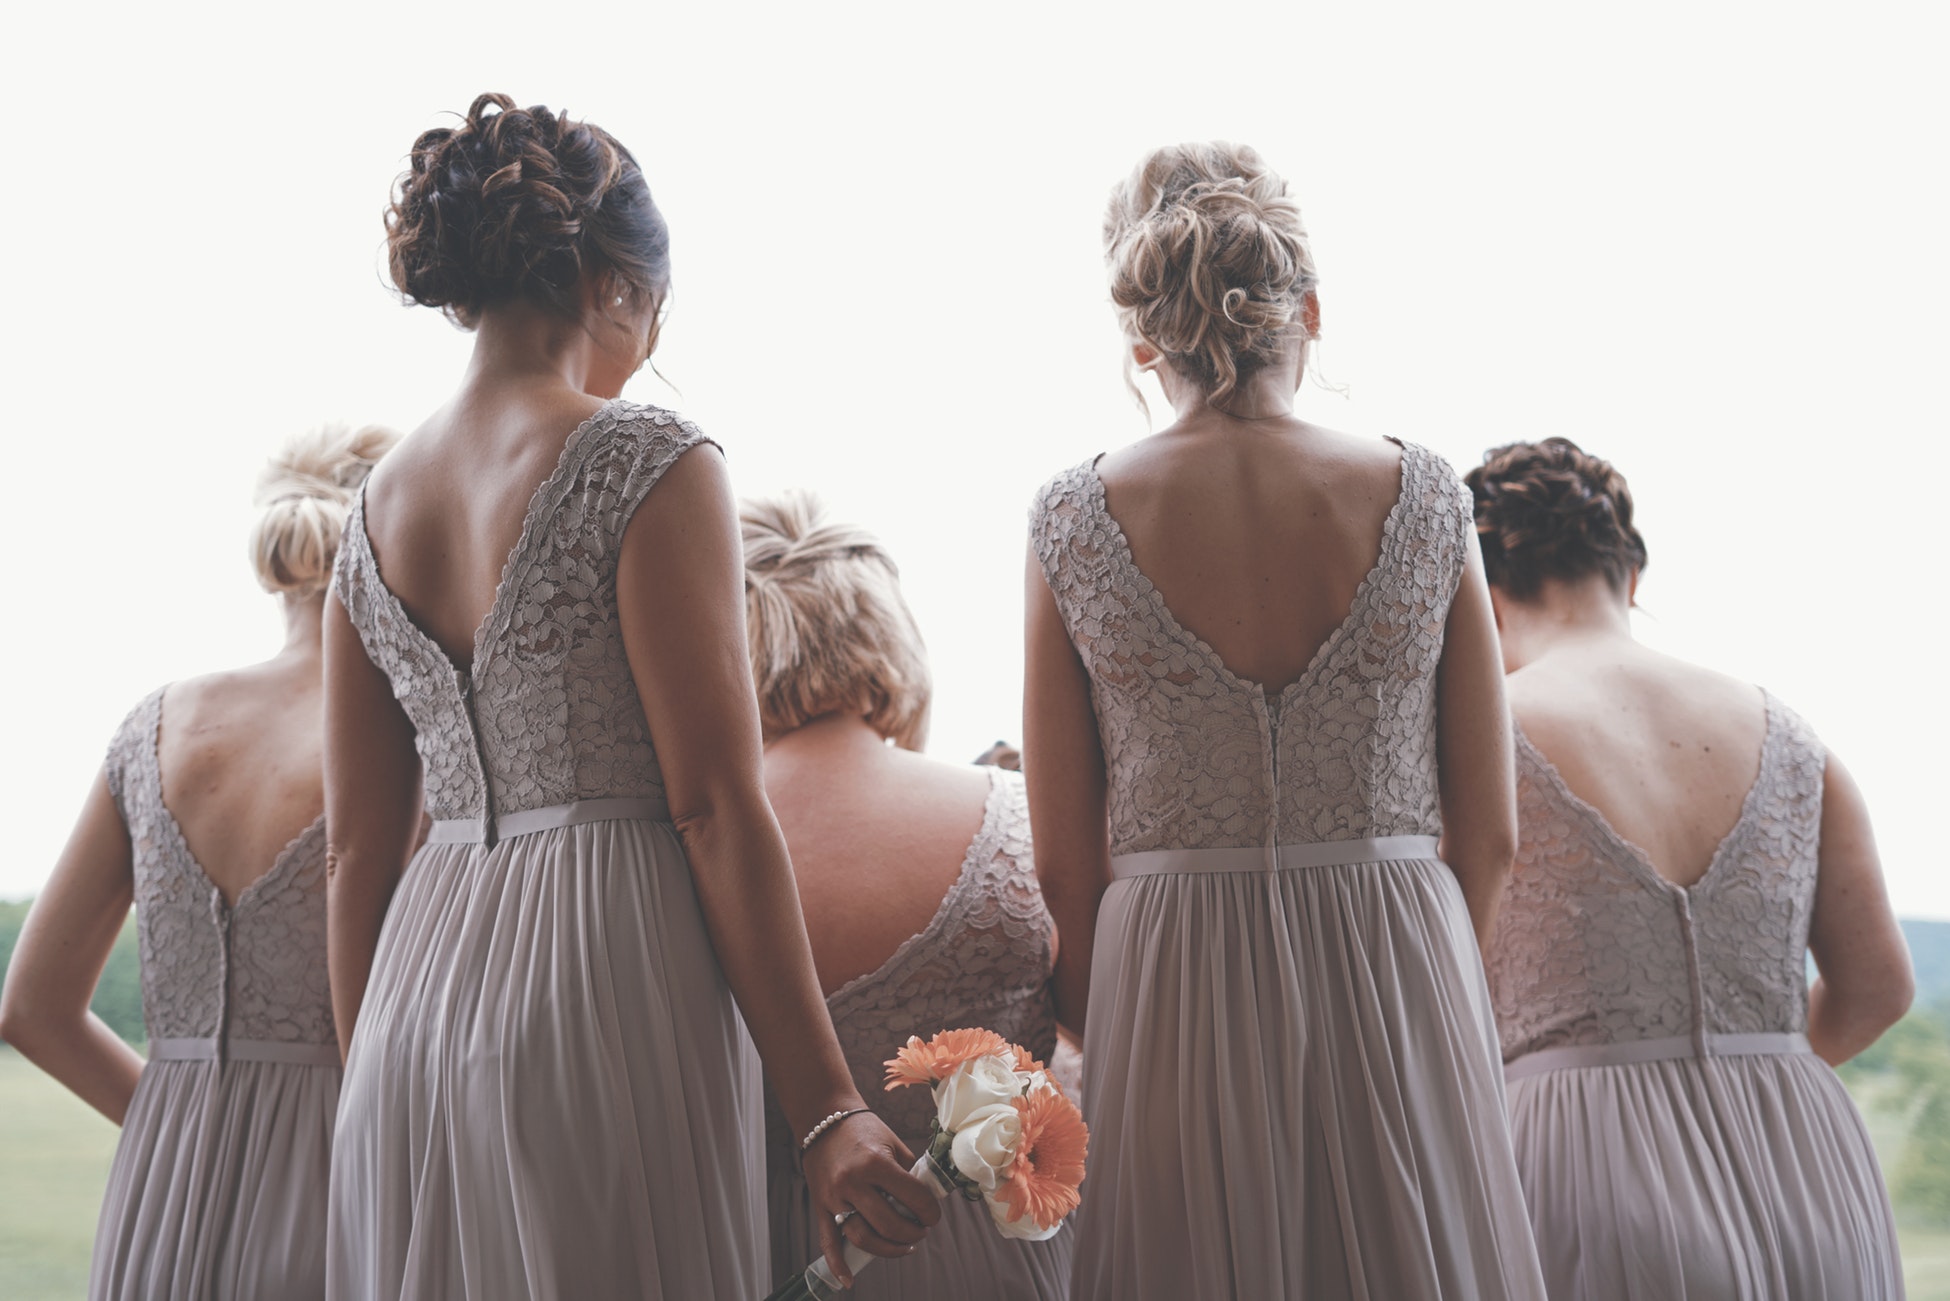 how to be confident on your wedding day2 - 4 Ways To Feel Confident On Your Wedding Day